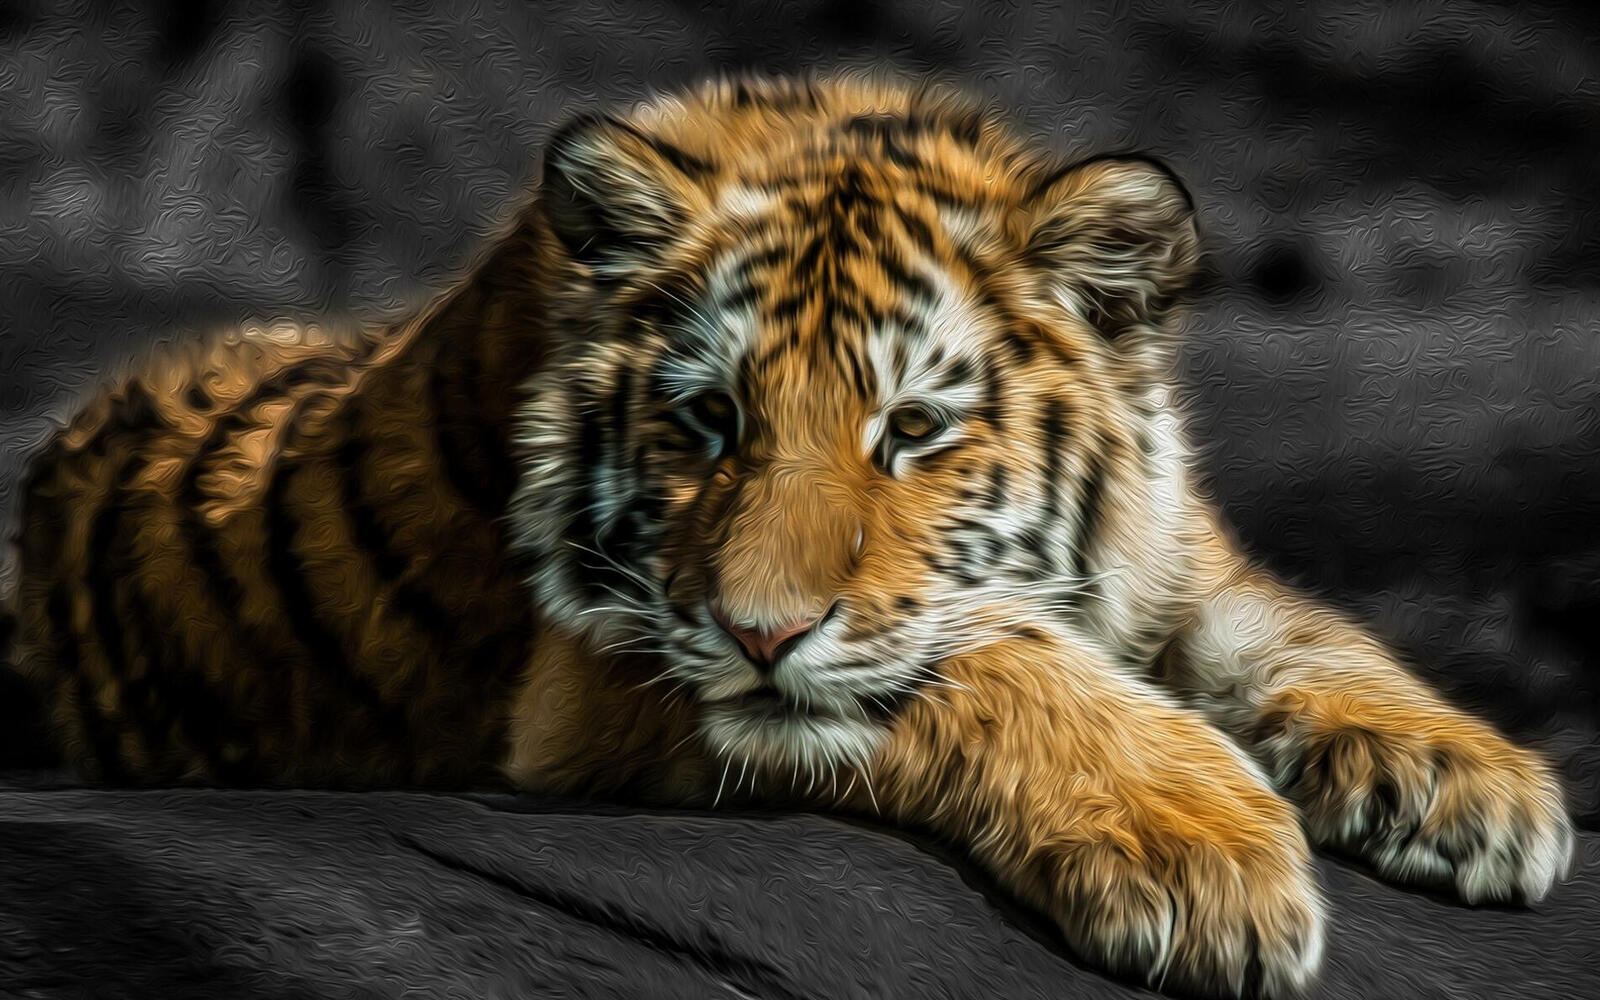 Wallpapers tiger cub look thoughtfulness on the desktop